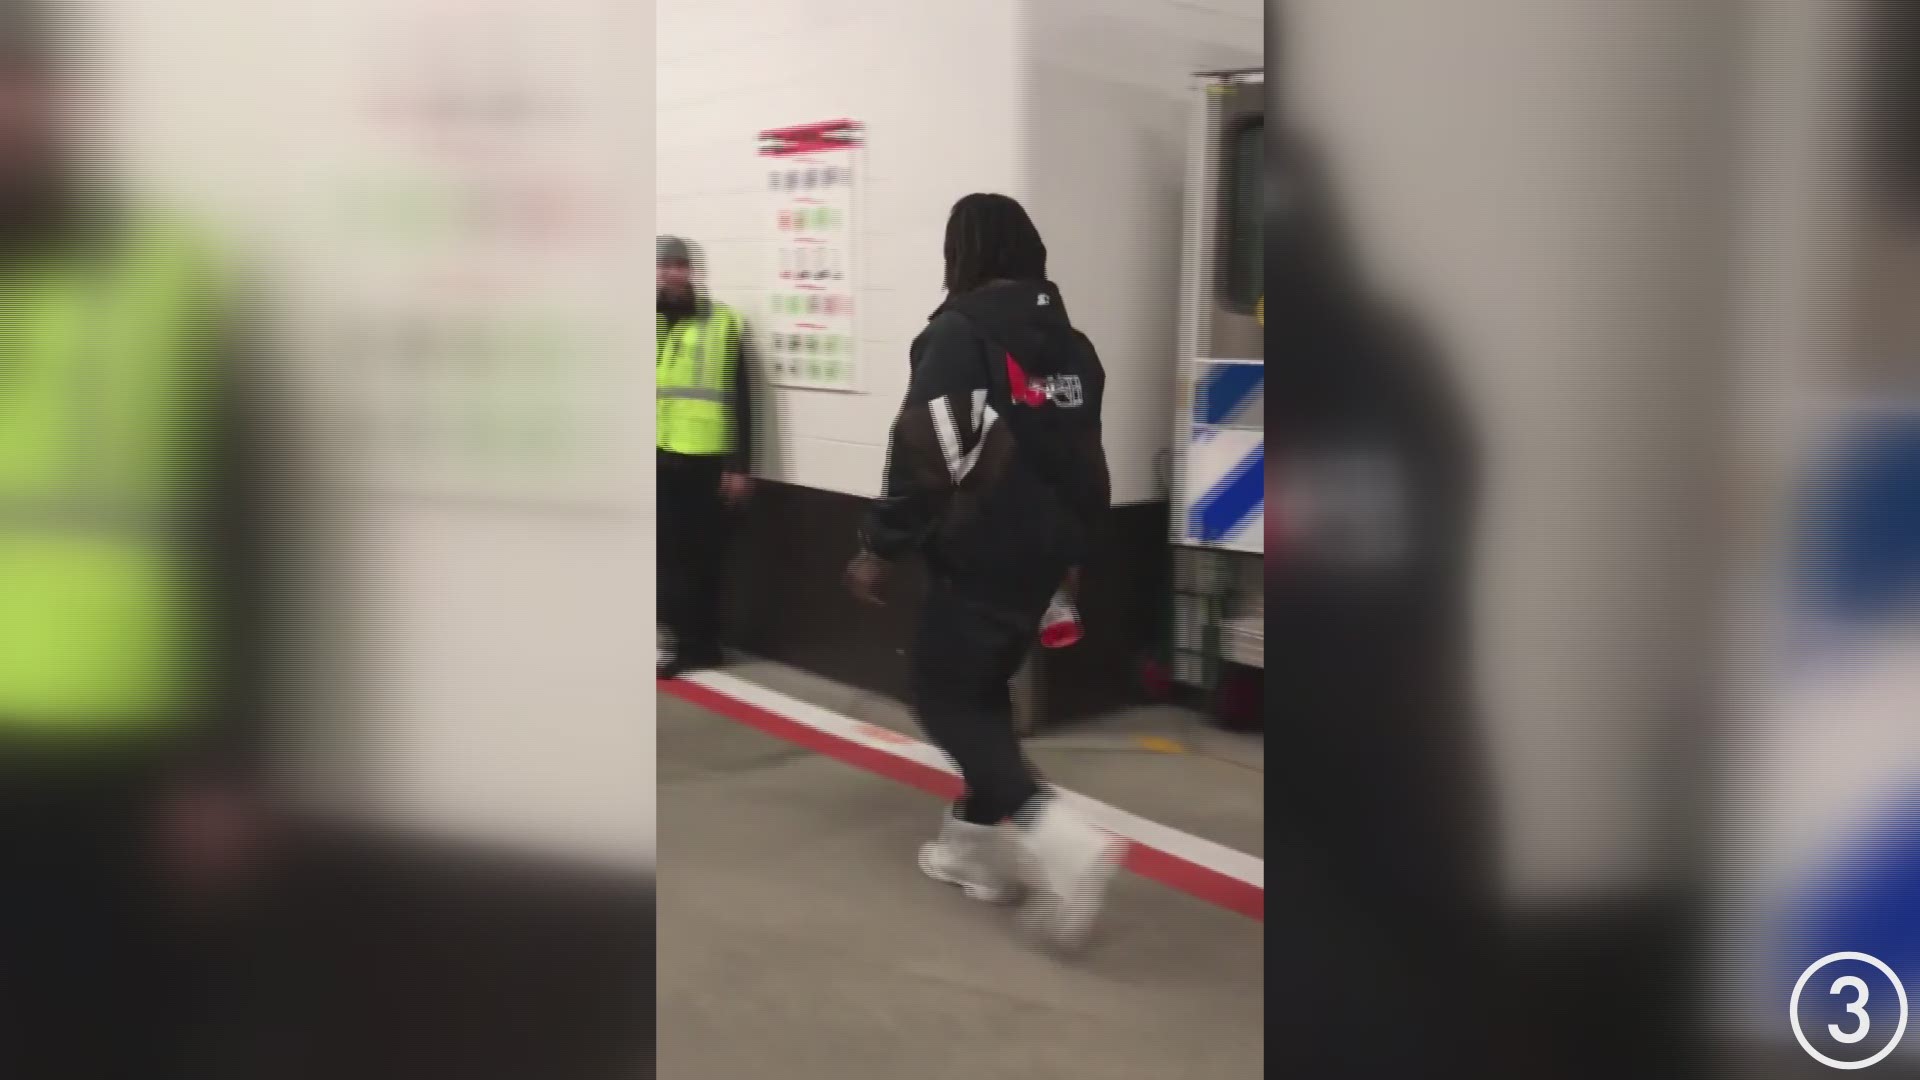 Kareem Hunt arrived at FirstEnergy Stadium for the Cleveland Browns' game vs. the Pittsburgh Steelers wearing a retro Starter jacket of his new team.